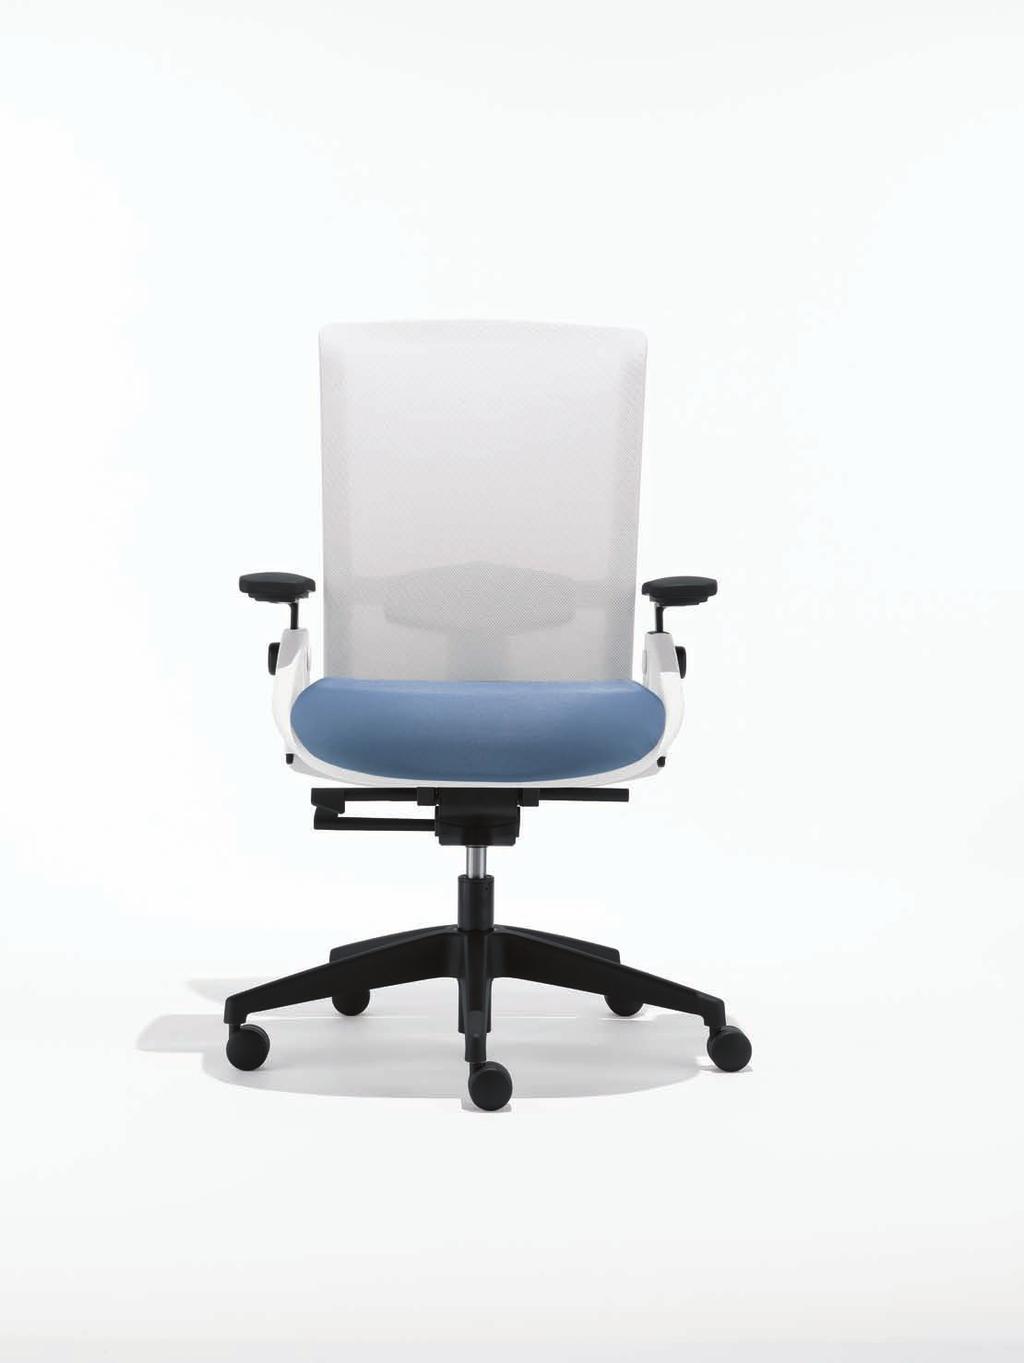 5 1 2 Height-adjustable arms: Offer a 4" range of adjustment with fixed cap, or for more computer-intensive work, 3D arm caps width, depth and pivot. Armless versions are also available.